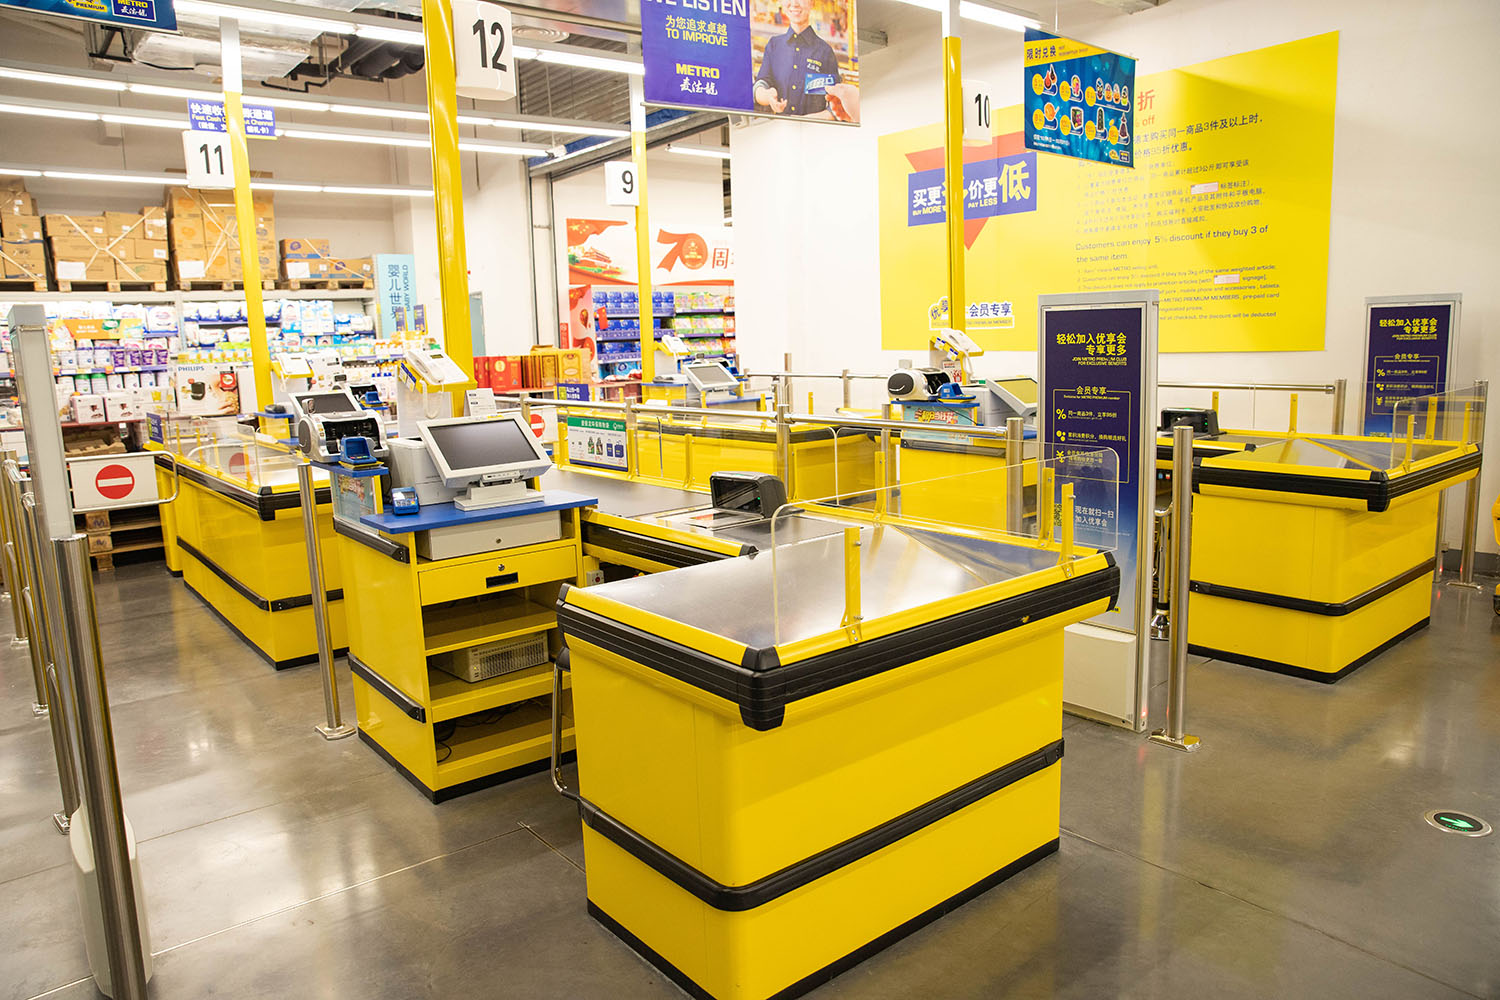 Display and placement of checkout counters